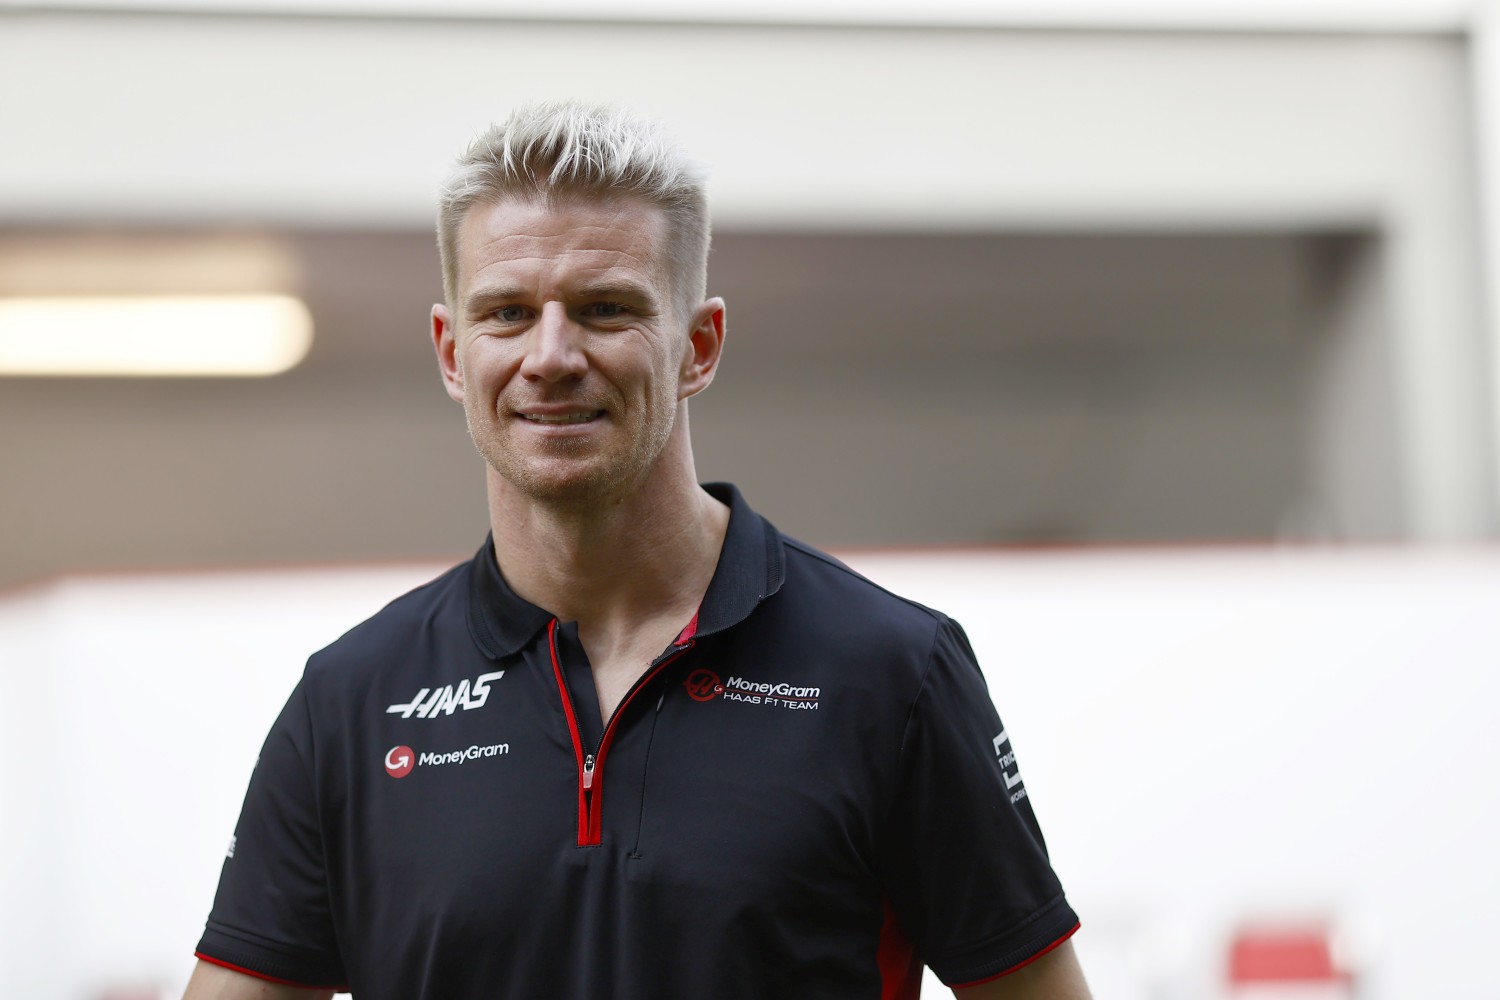 Nico Hulkenberg, Haas F1 Team, arriving in the paddock during the Singapore GP at Marina Bay Street Circuit on Thursday September 14, 2023 in Singapore, Singapore. (Photo by Andy Hone / LAT Images)